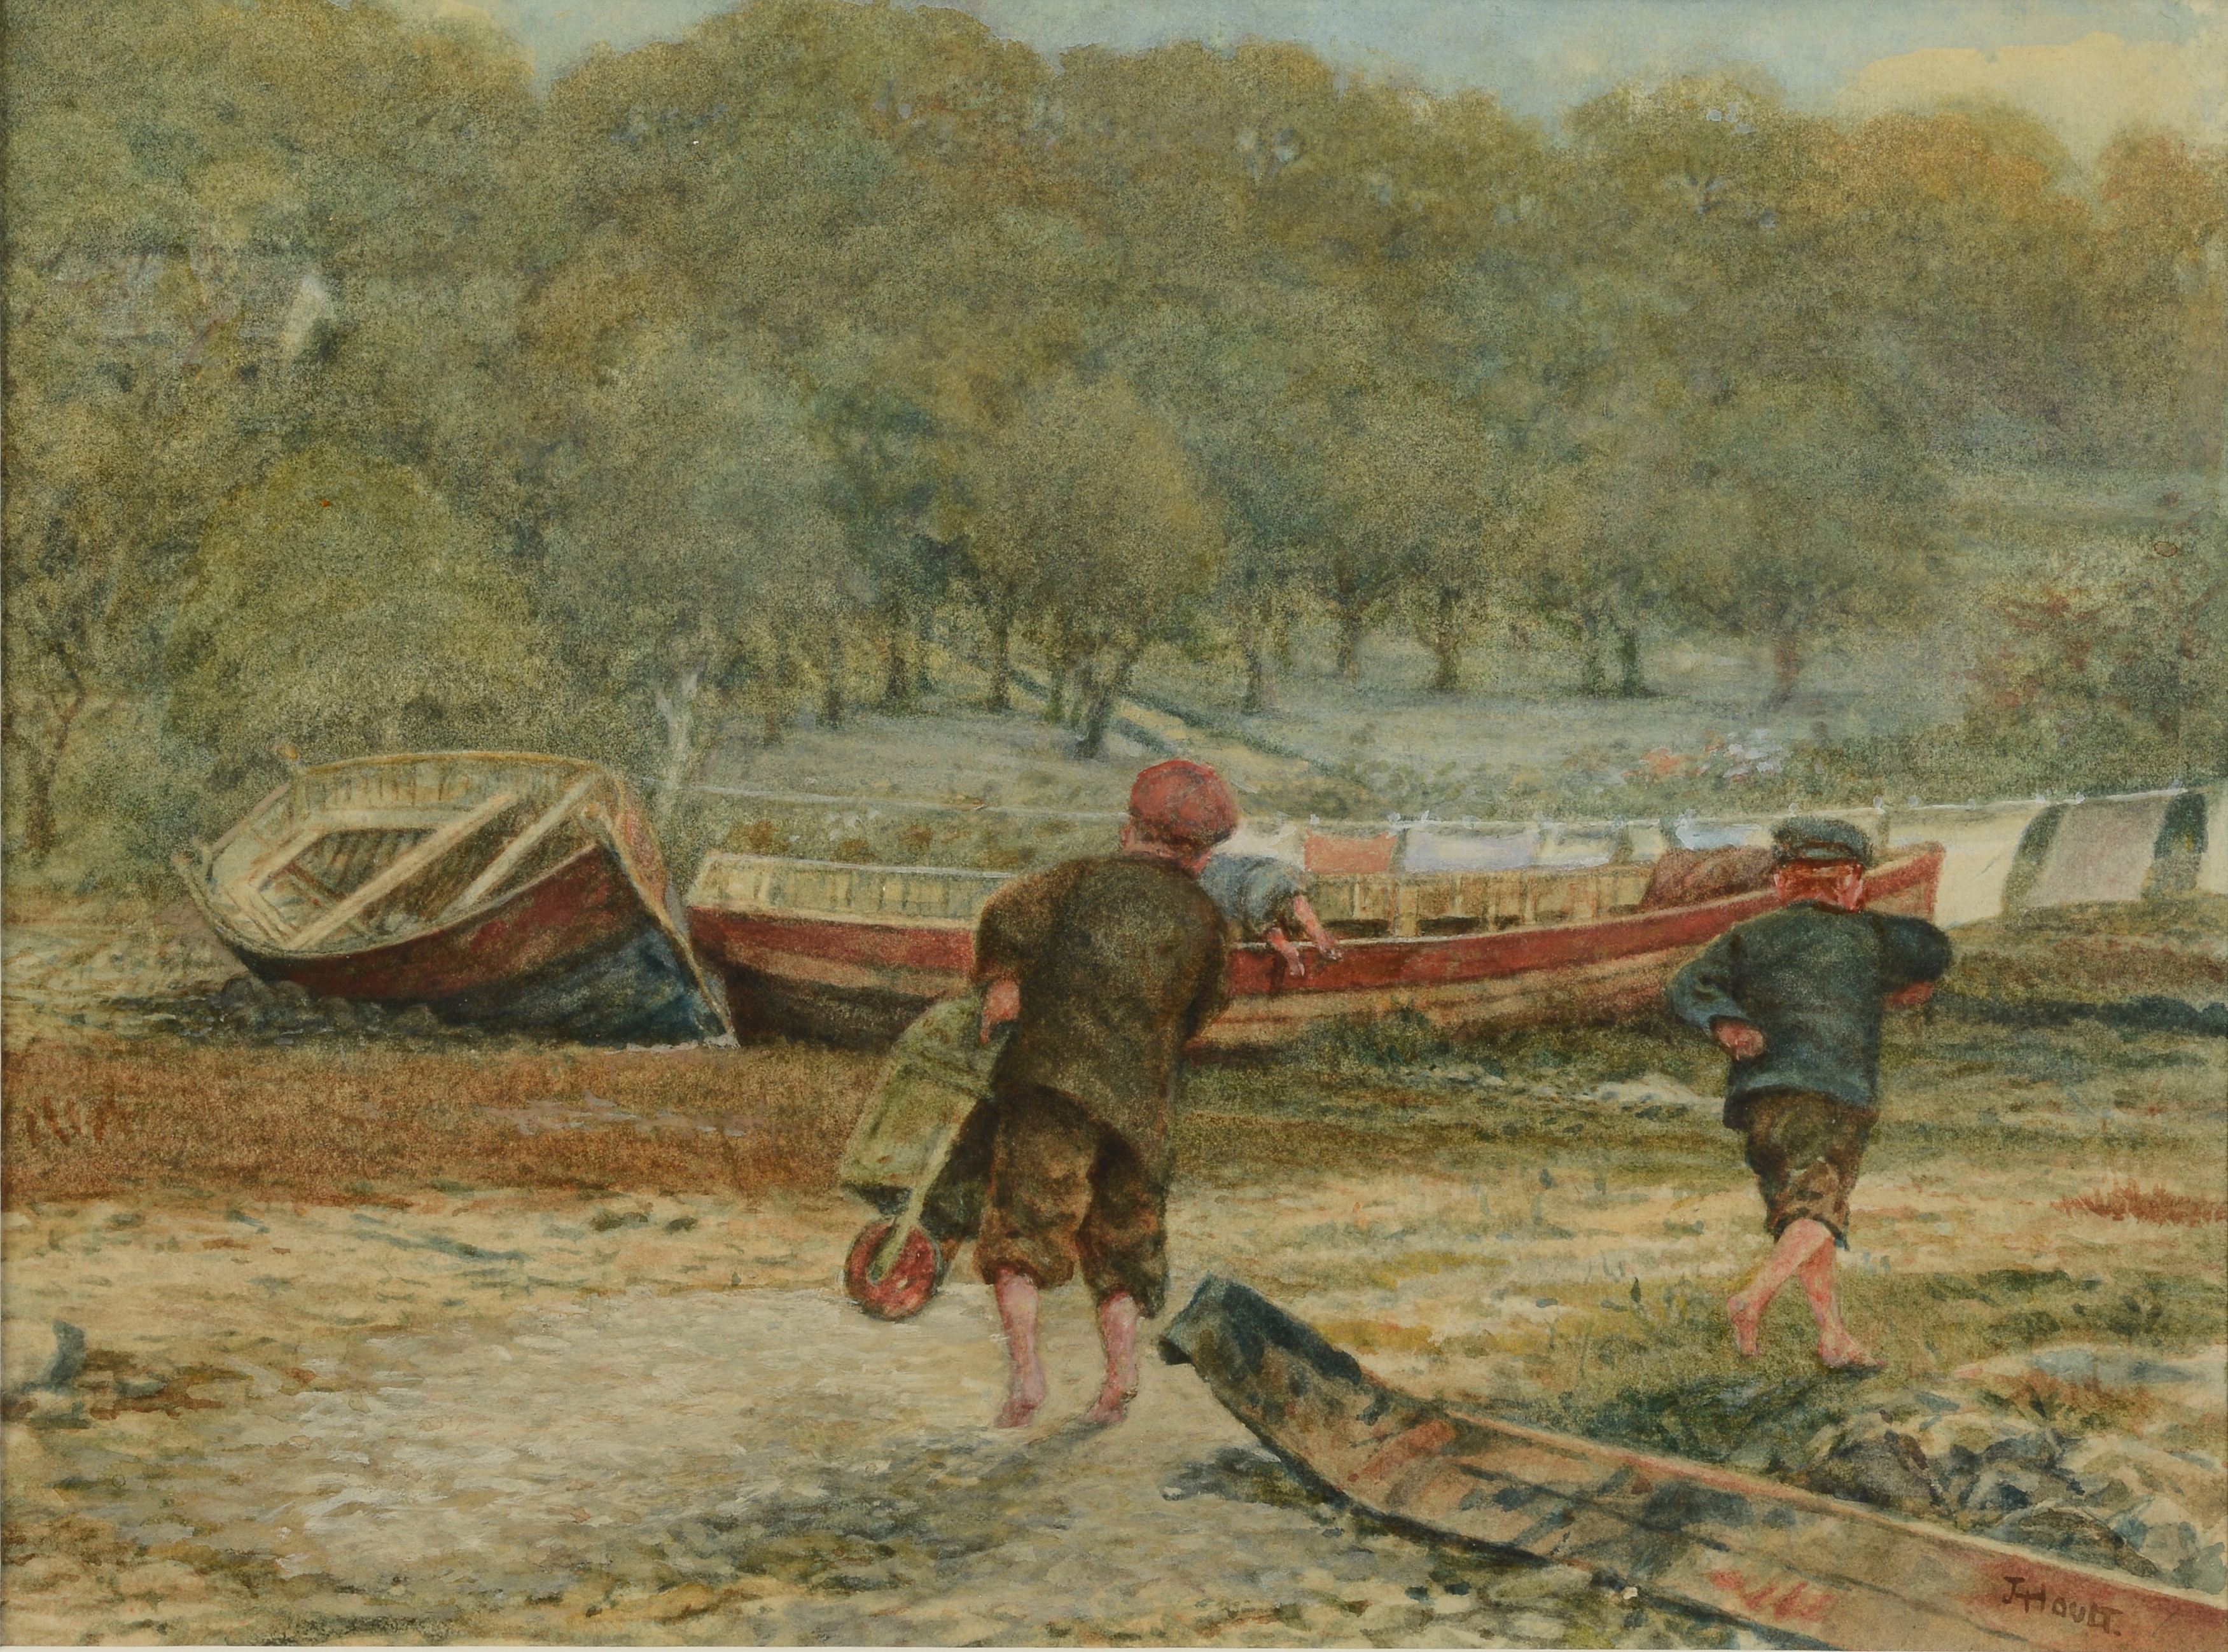 J HOULT (Early 20th century), Young boys playing amongst beached fishing boats, woodland beyond,